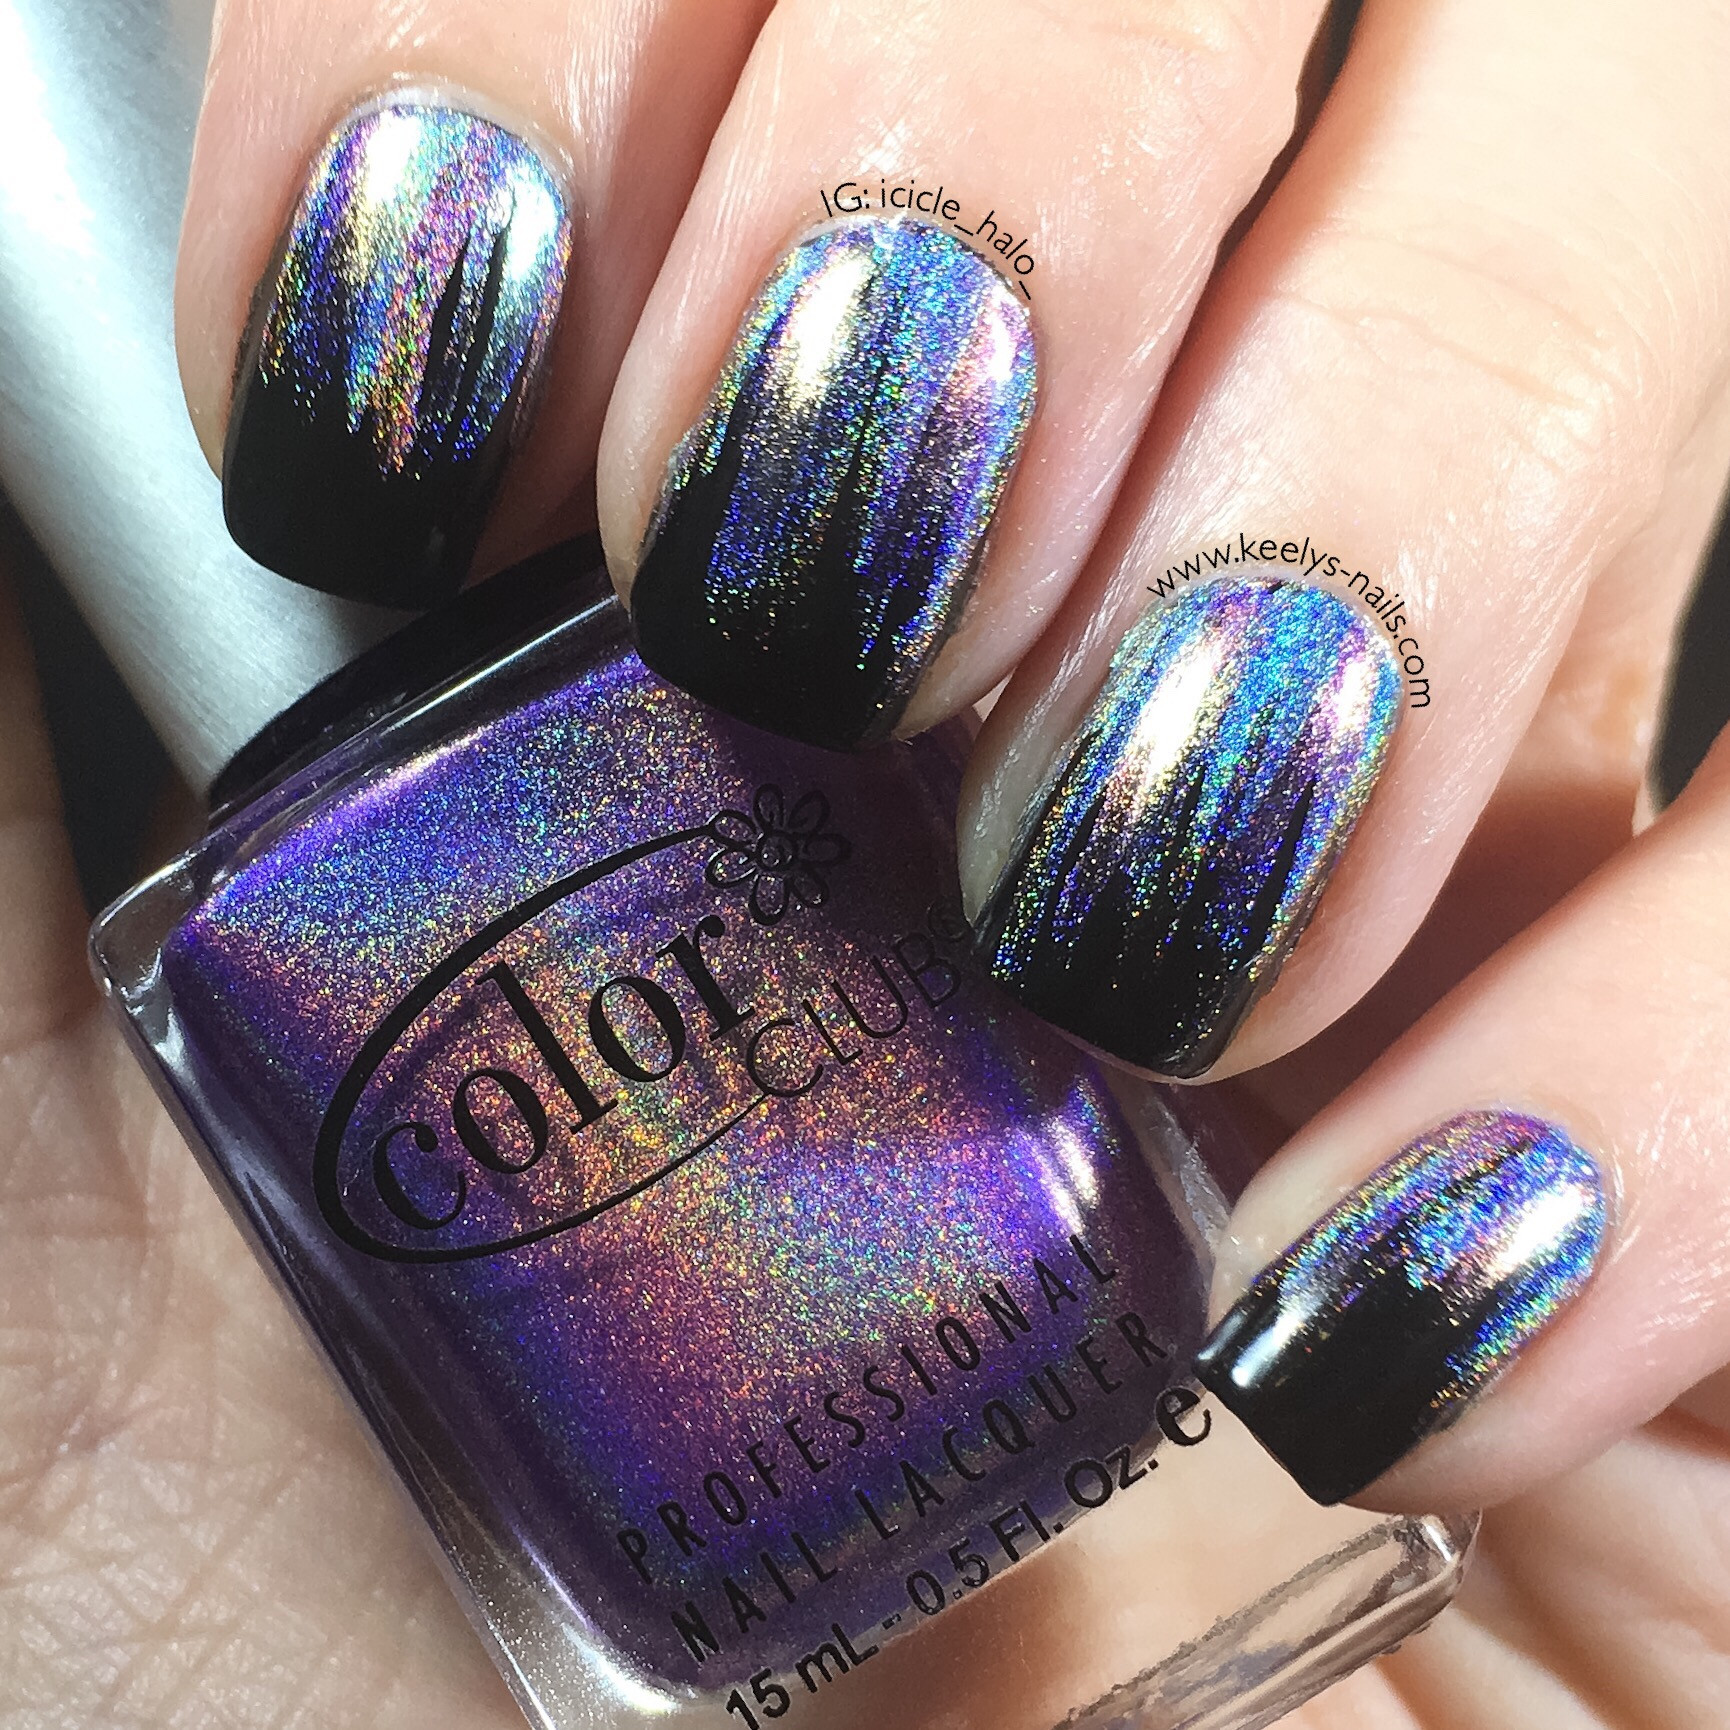 Holographic Nail Designs
 Glitch Holographic Waterfall Nail Art Keely s Nails